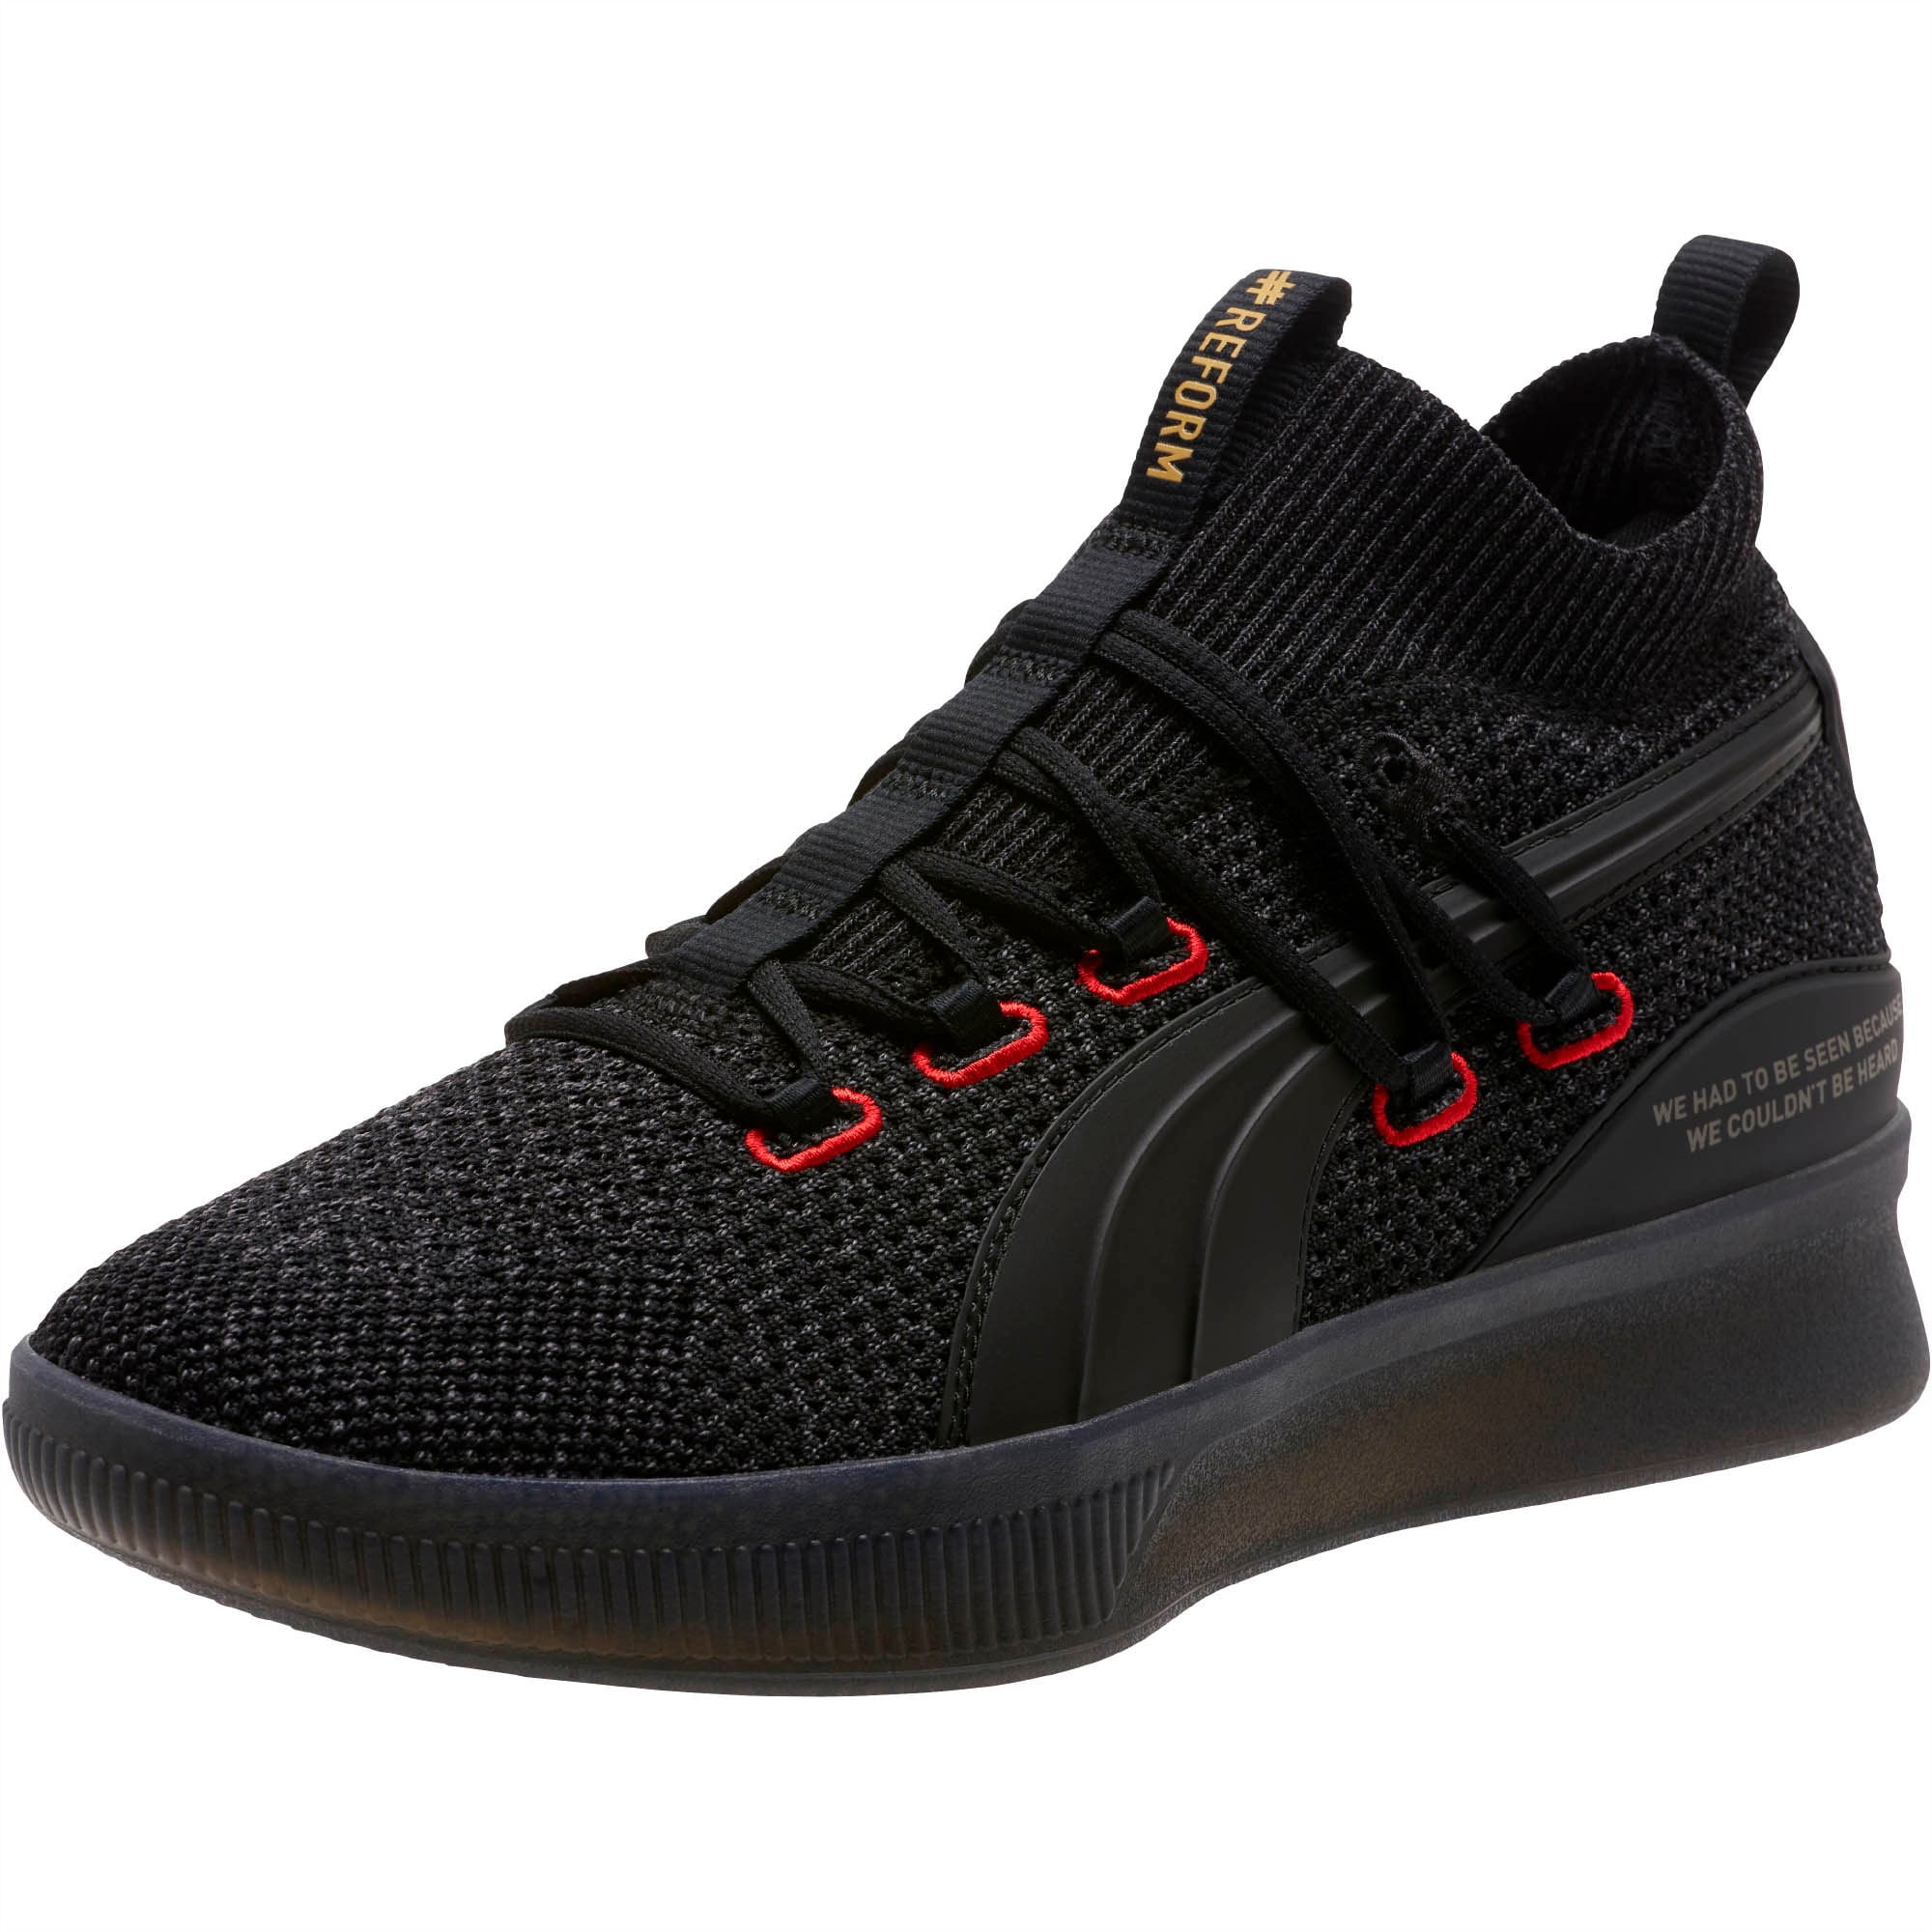 Clyde Court Reform Basketball Shoes 